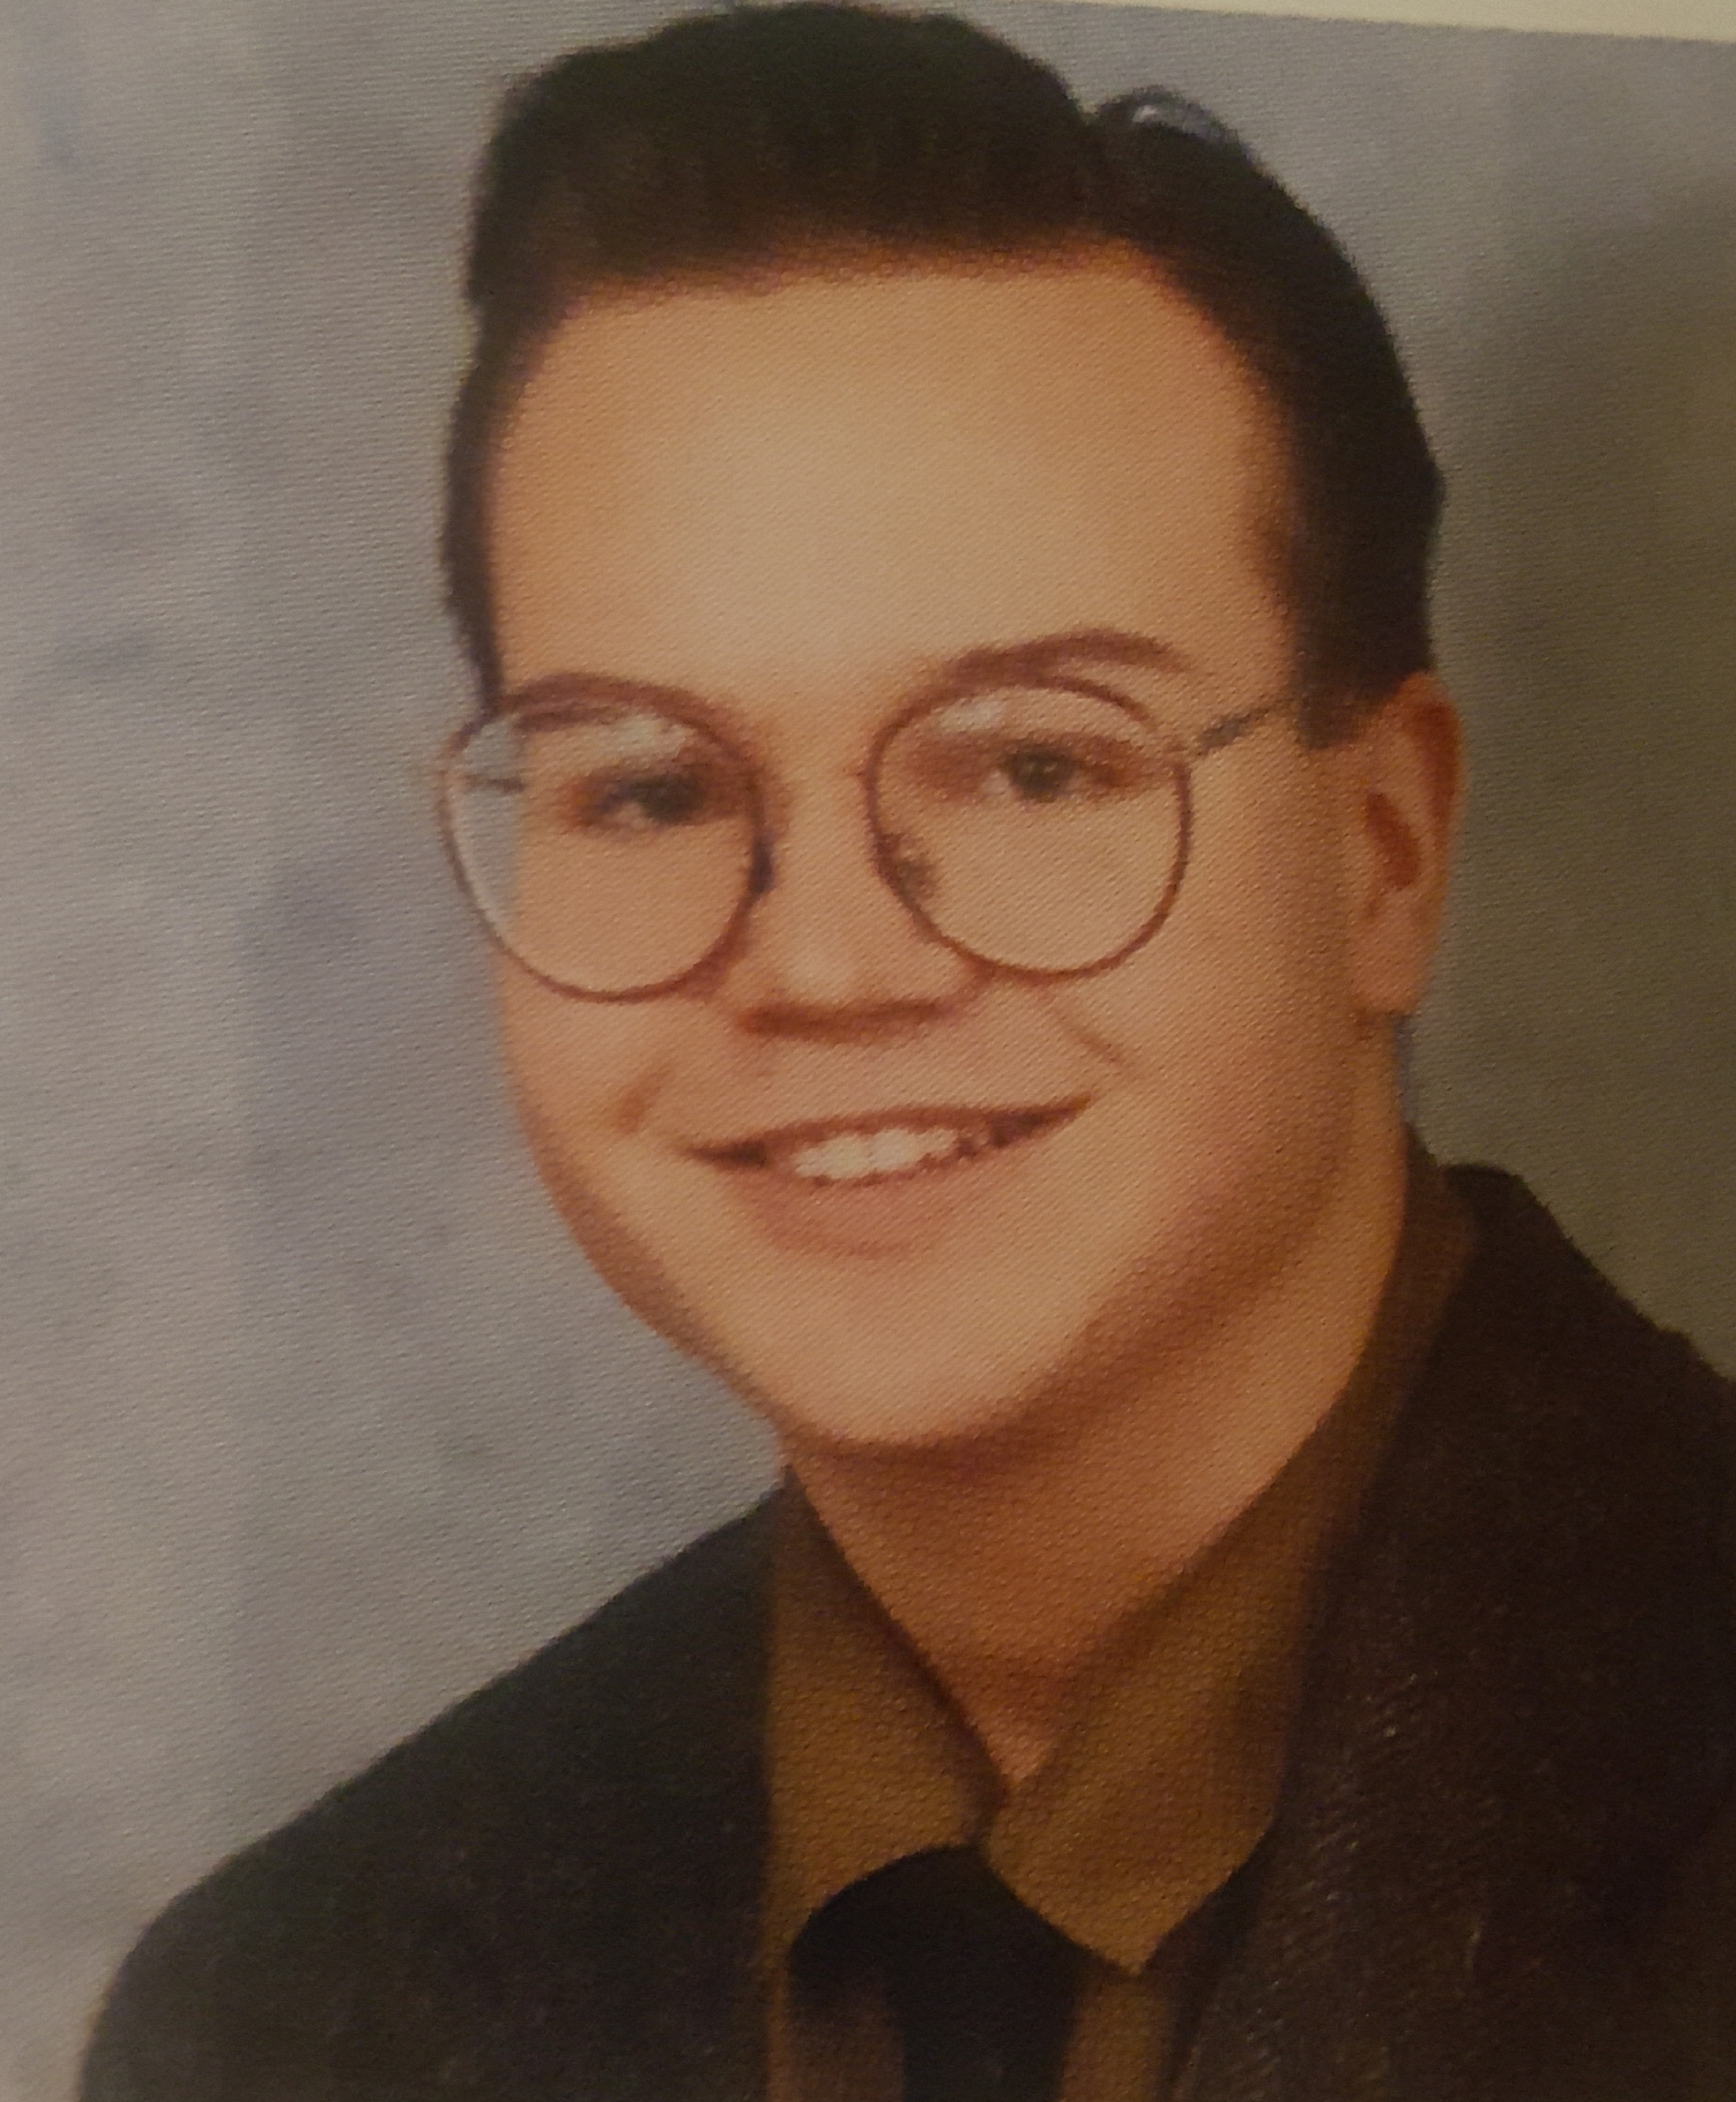 young man smiling wearing glasses